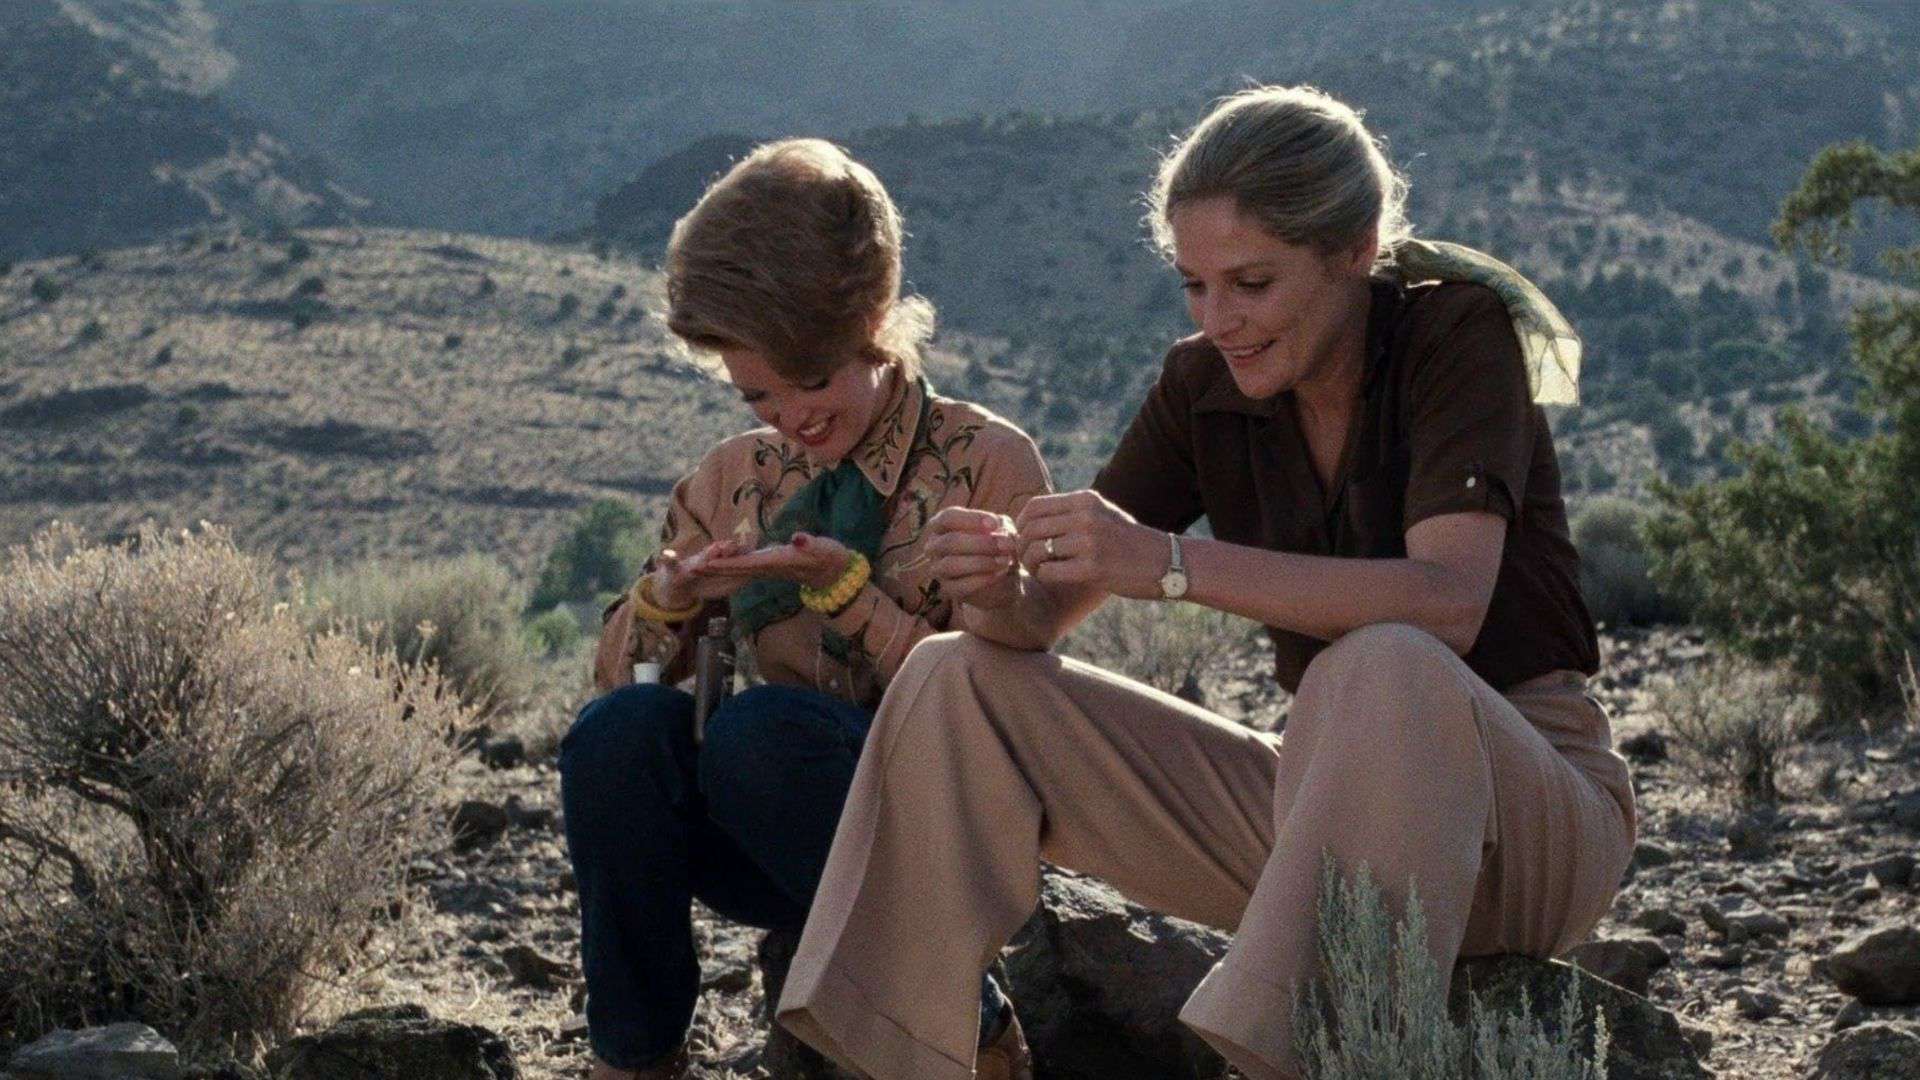 Two women sitting in a desert landscape in this image from Desert Hearts Productions.